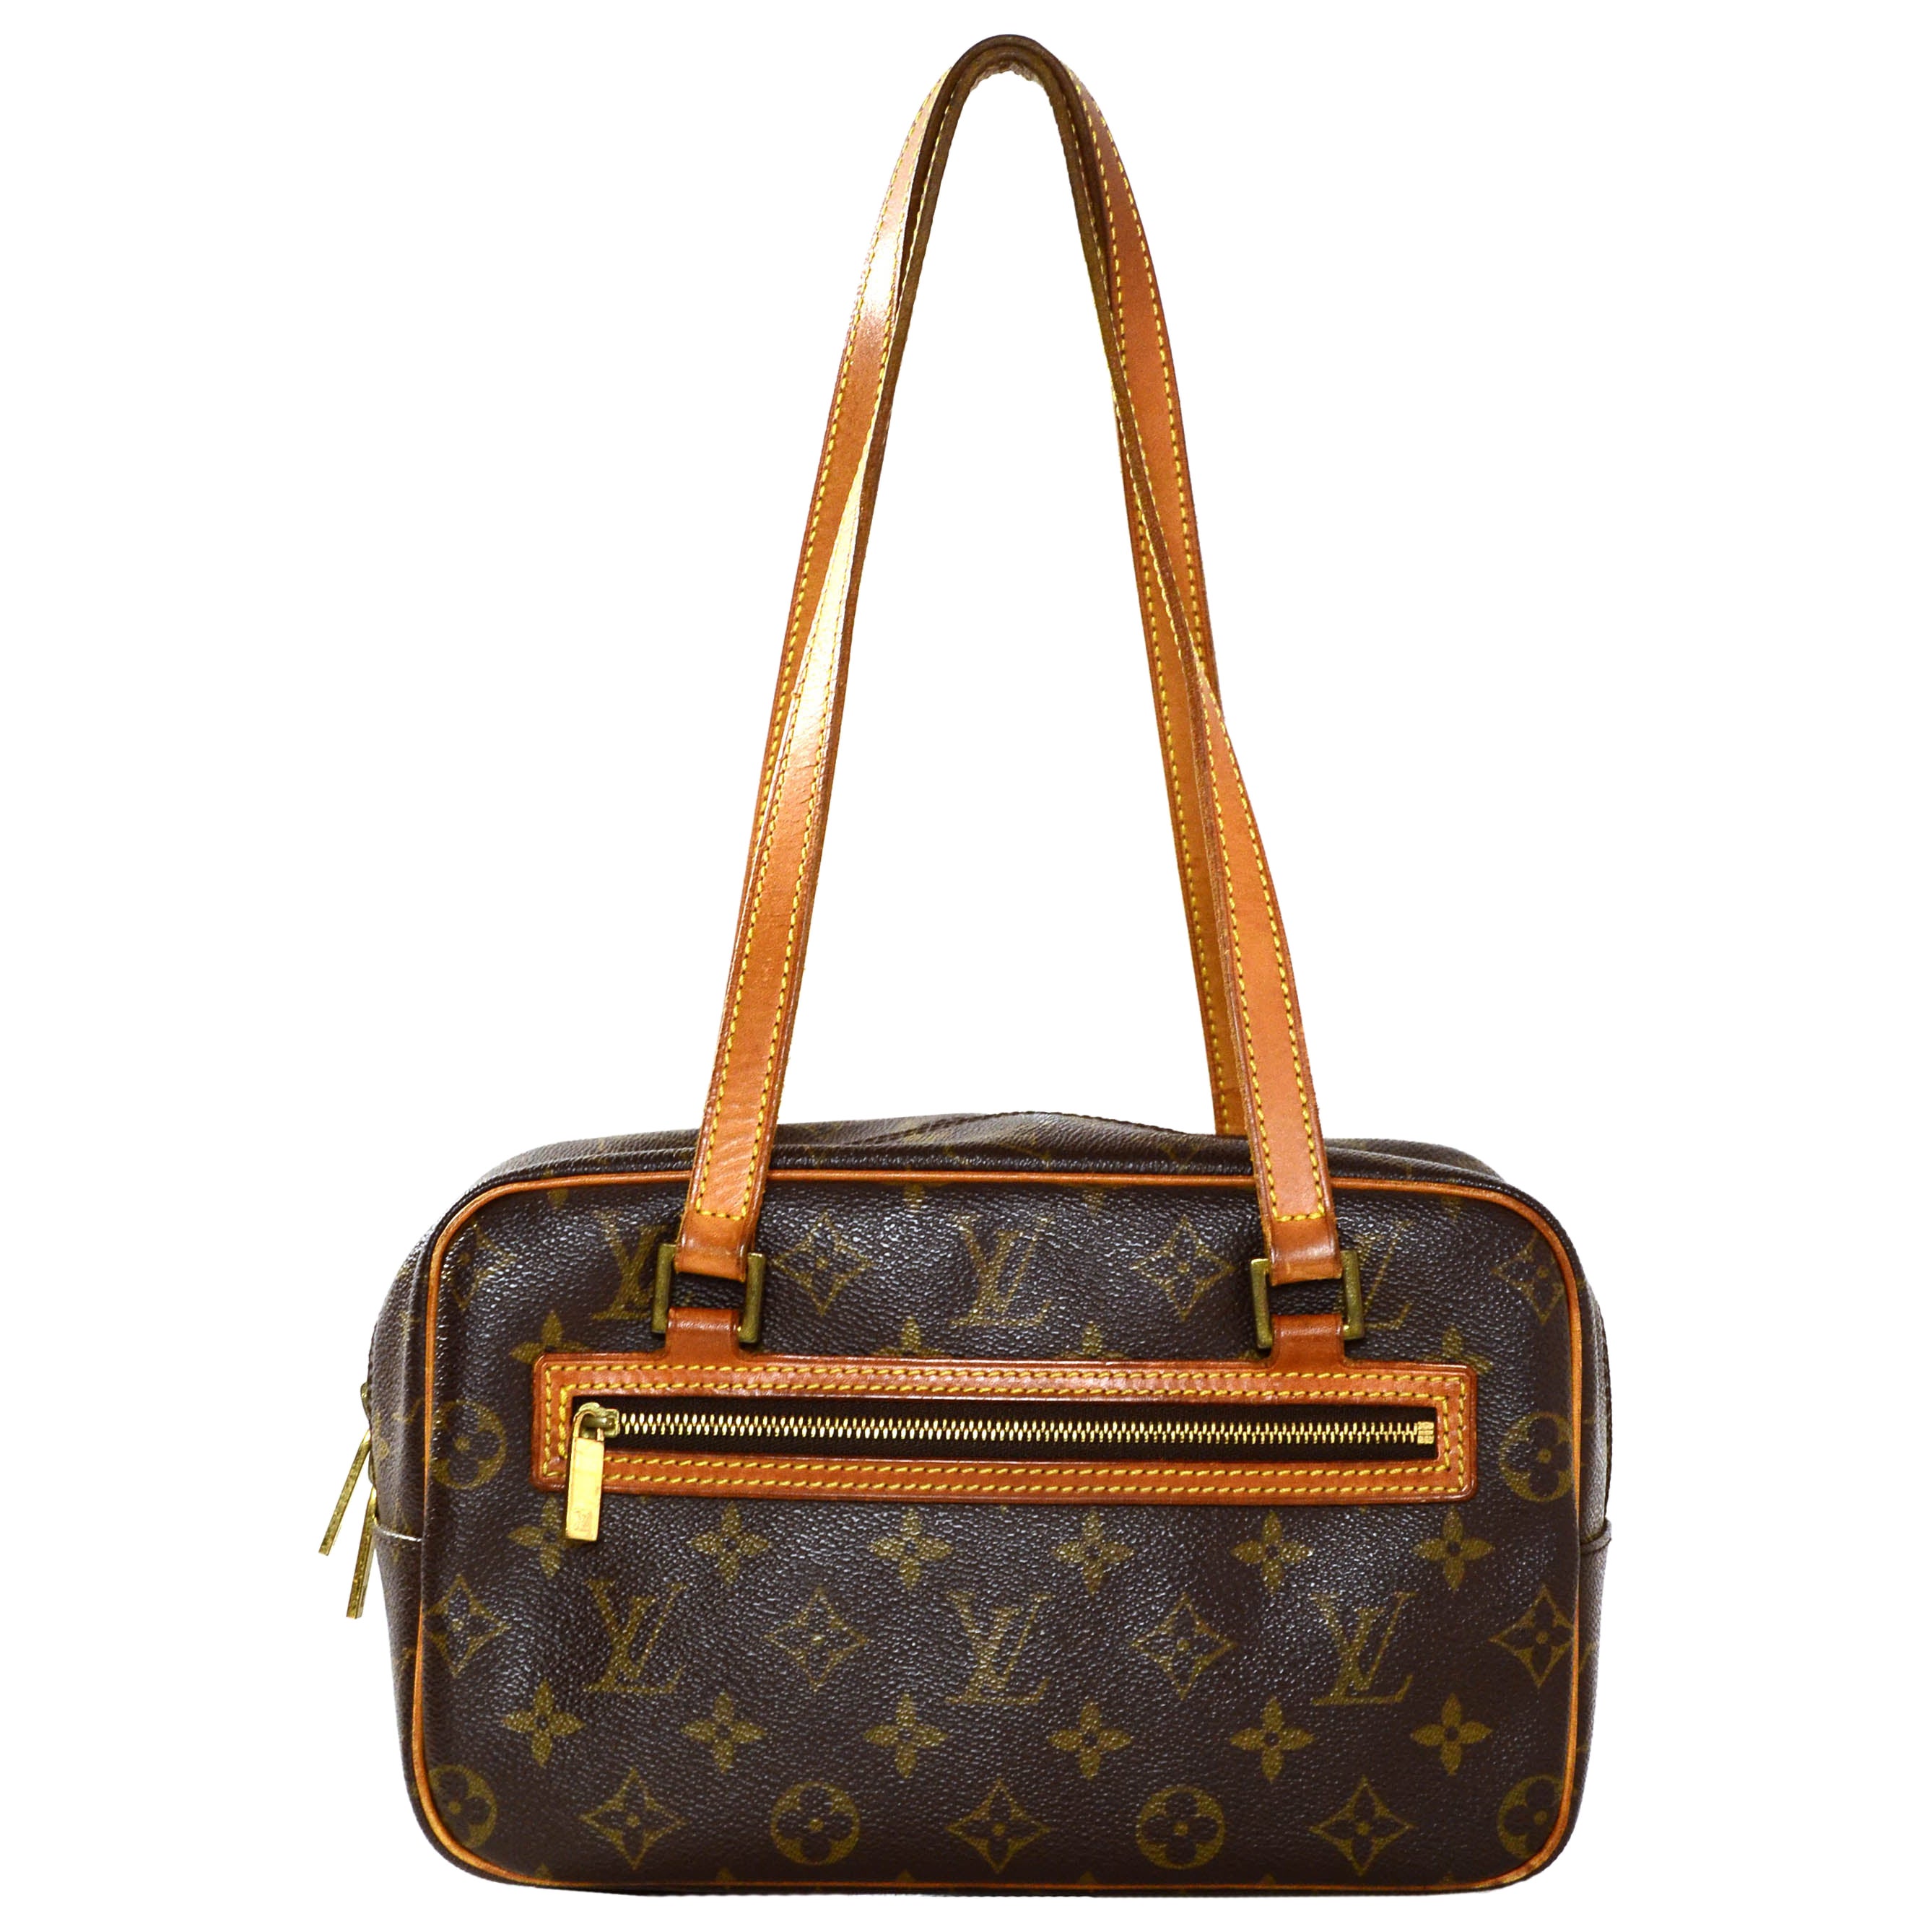 Louis Vuitton Bowling - 11 For Sale on 1stDibs  lv bowling bag, vintage  louis vuitton bowling bag, louis vuitton bowling bag vintage